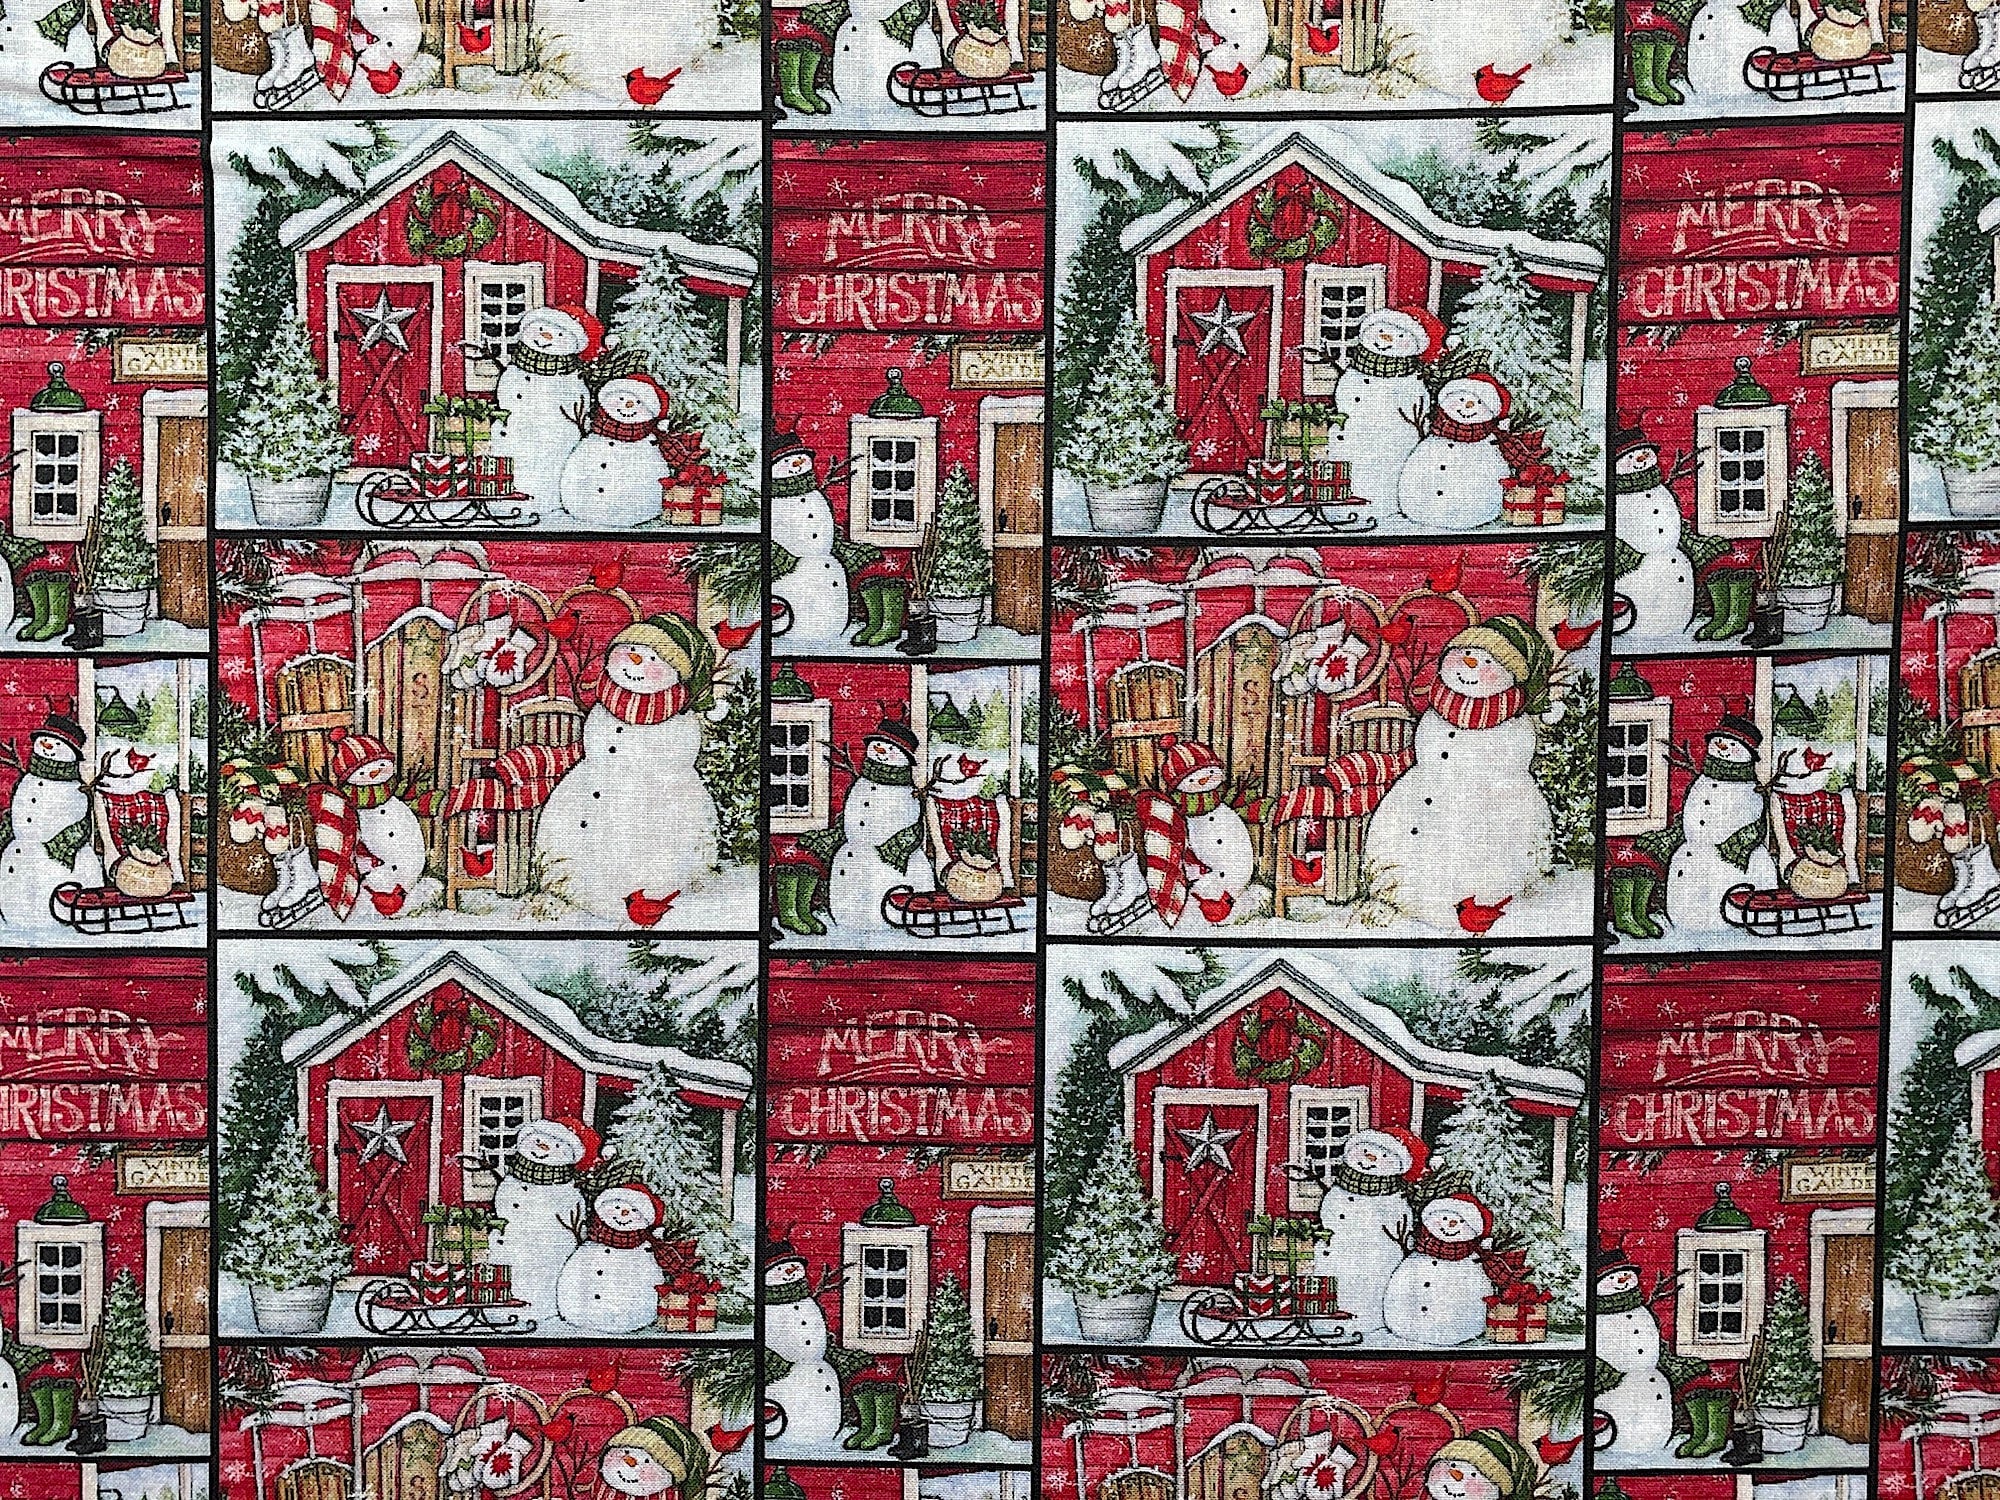 This fabric is called Santa's Lodge. This fabric is covered with buildings that say Merry Christmas. You will also find Snowmen, sleighs, trees and more.